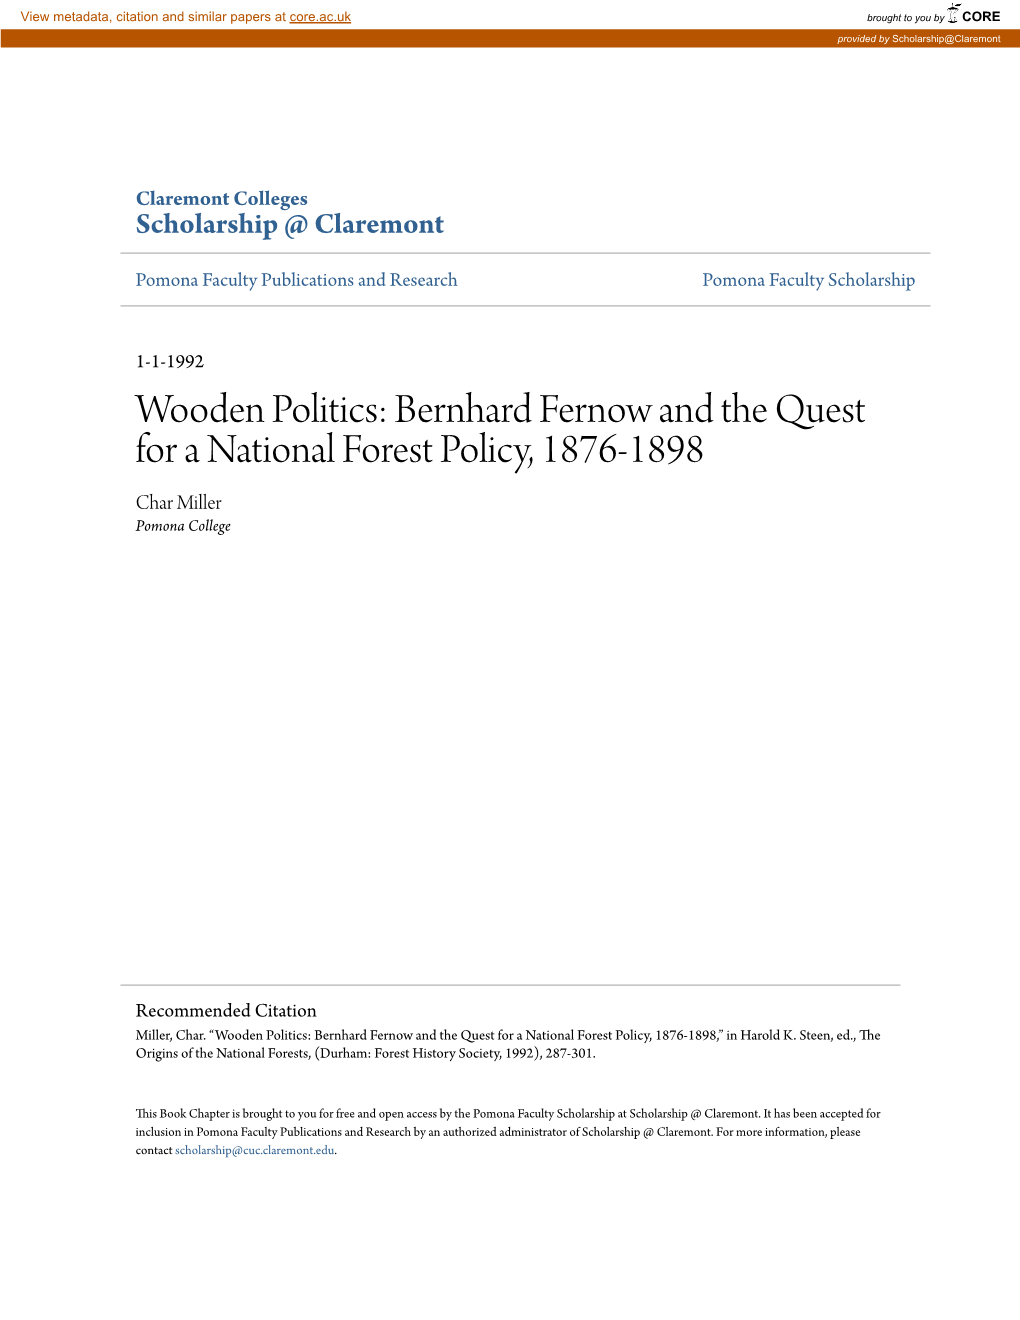 Bernhard Fernow and the Quest for a National Forest Policy, 1876-1898 Char Miller Pomona College